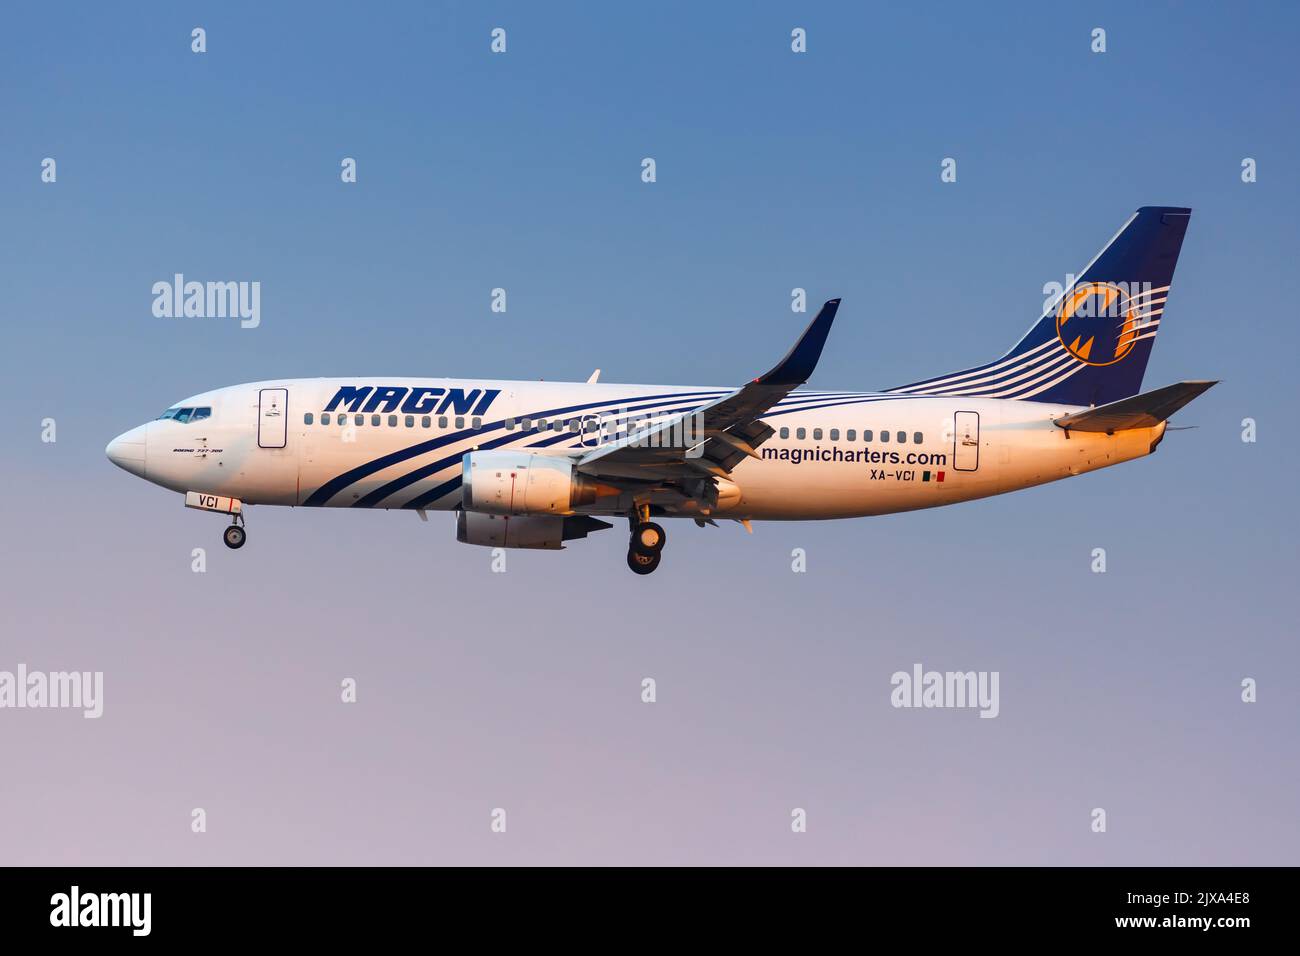 Mexico City, Mexico - April 15, 2022: Magnicharters Boeing 737-300 airplane at Mexico City airport (MEX) in Mexico. Stock Photo